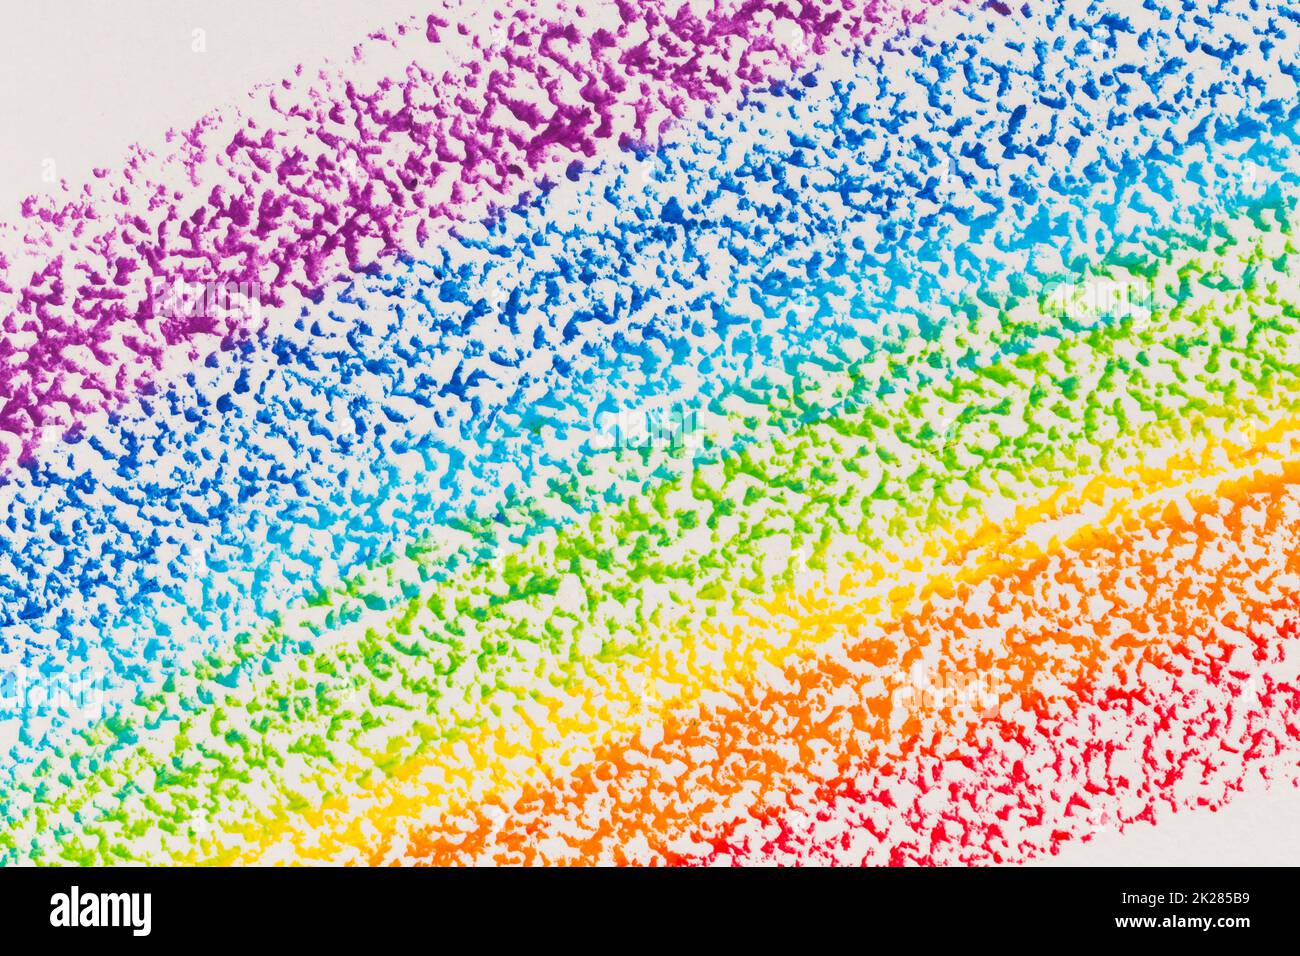 Crayon rainbow background Banque D'Images